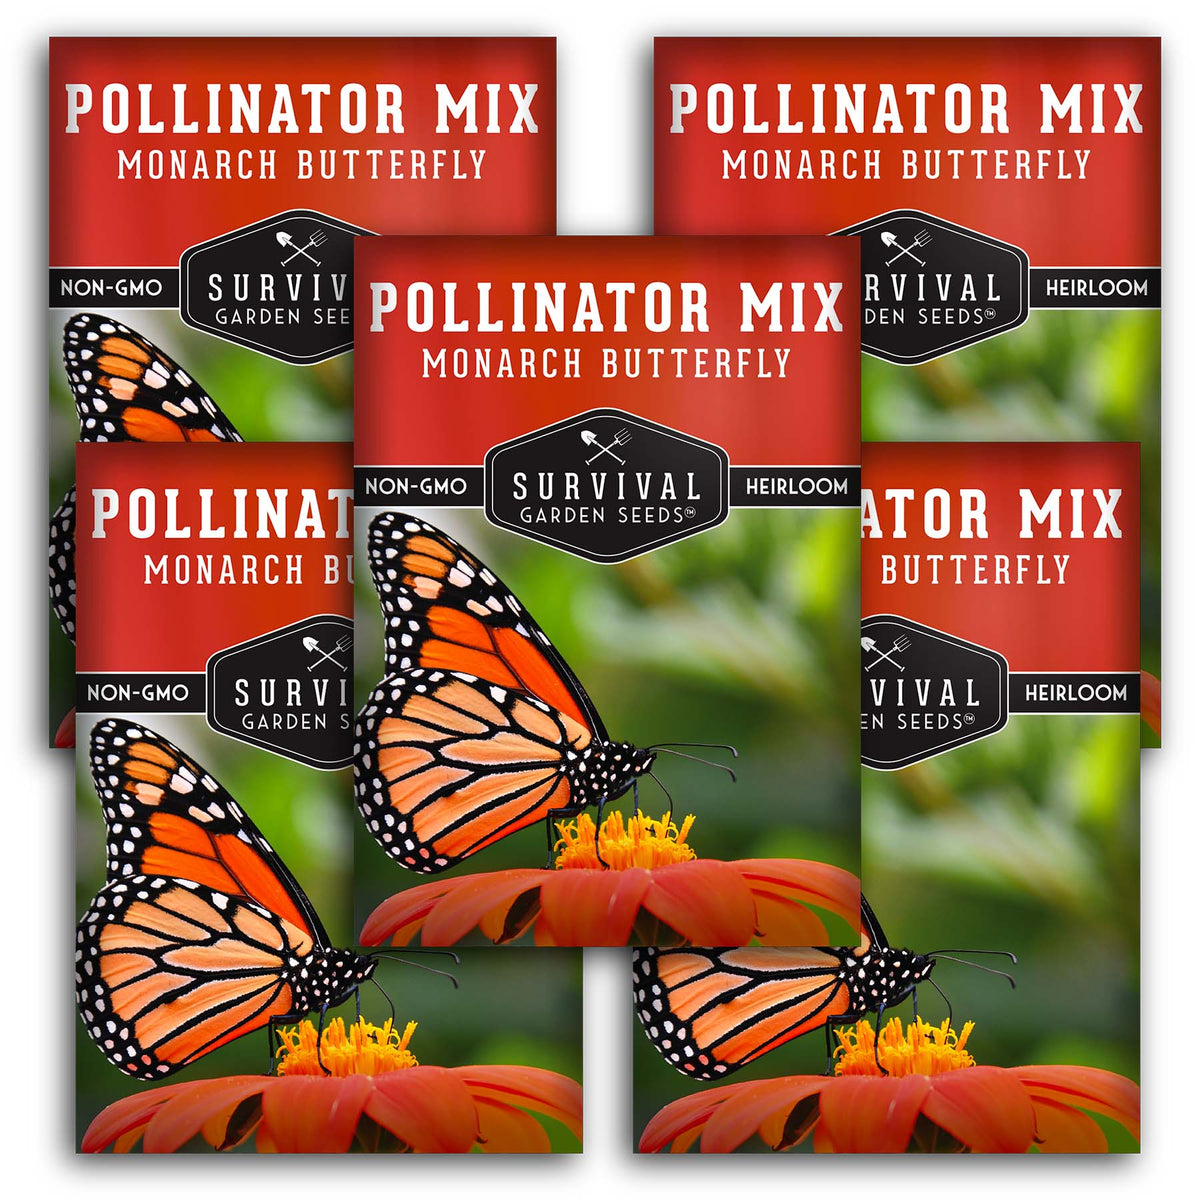 Pollinator Flower Seed Mixture for Attracting Monarchs, Butterflies, &amp; More